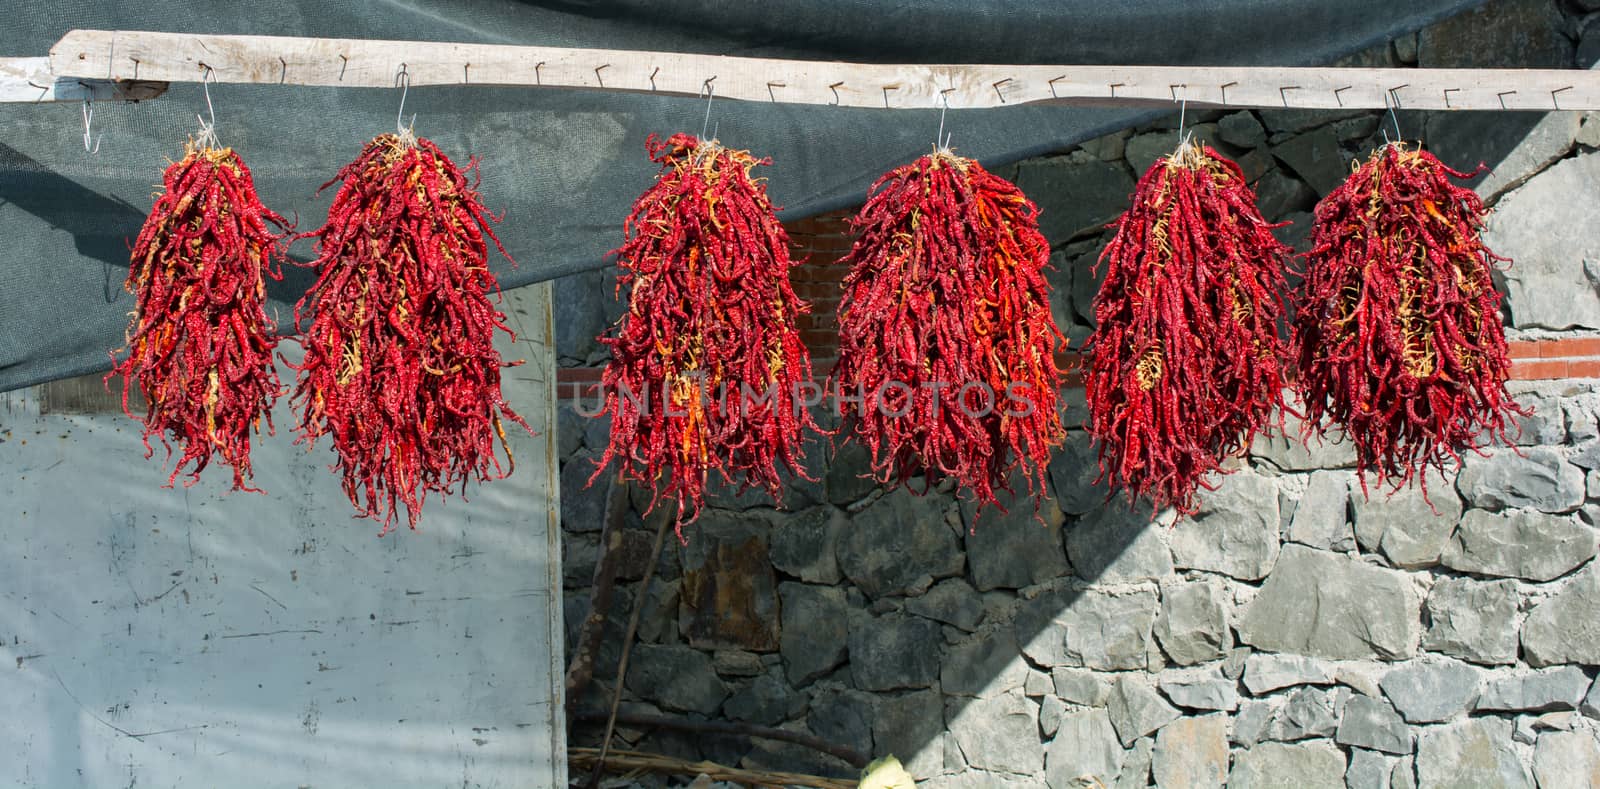 dried red peppers.dried under sunlight.in the winter season, dried to eat